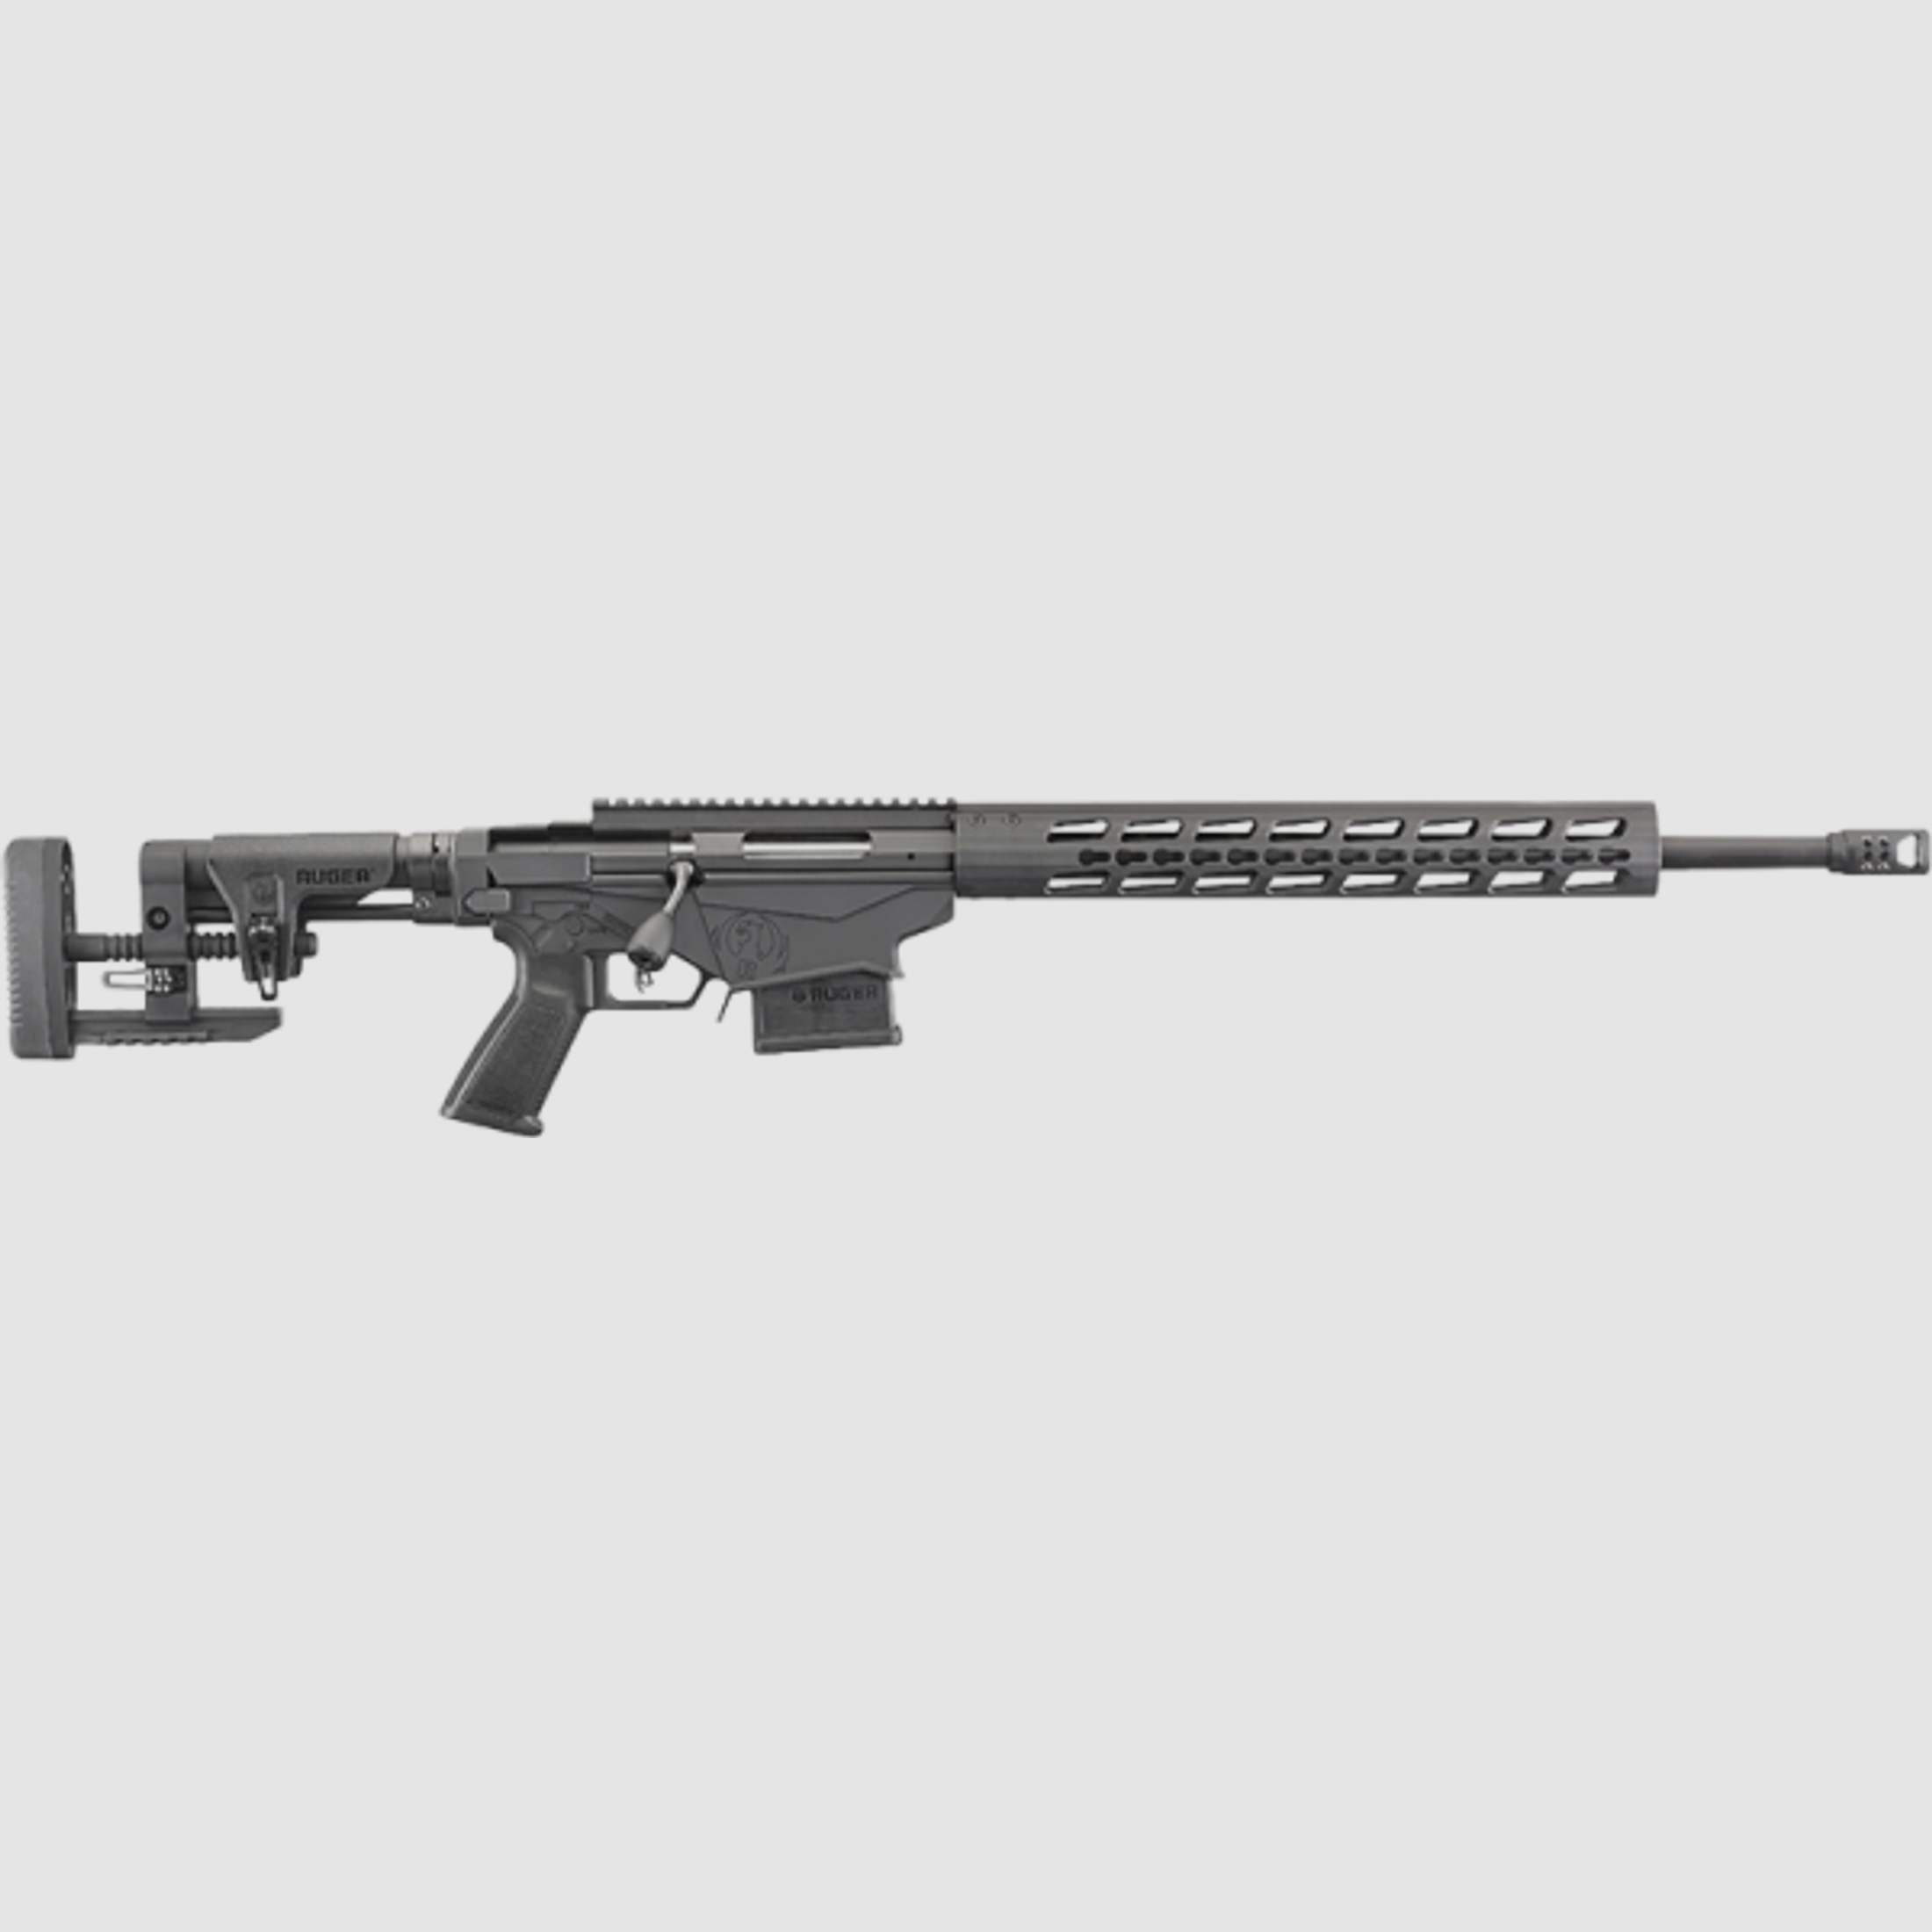 Ruger Precision Rifle Generation 2 Repetierbüchse